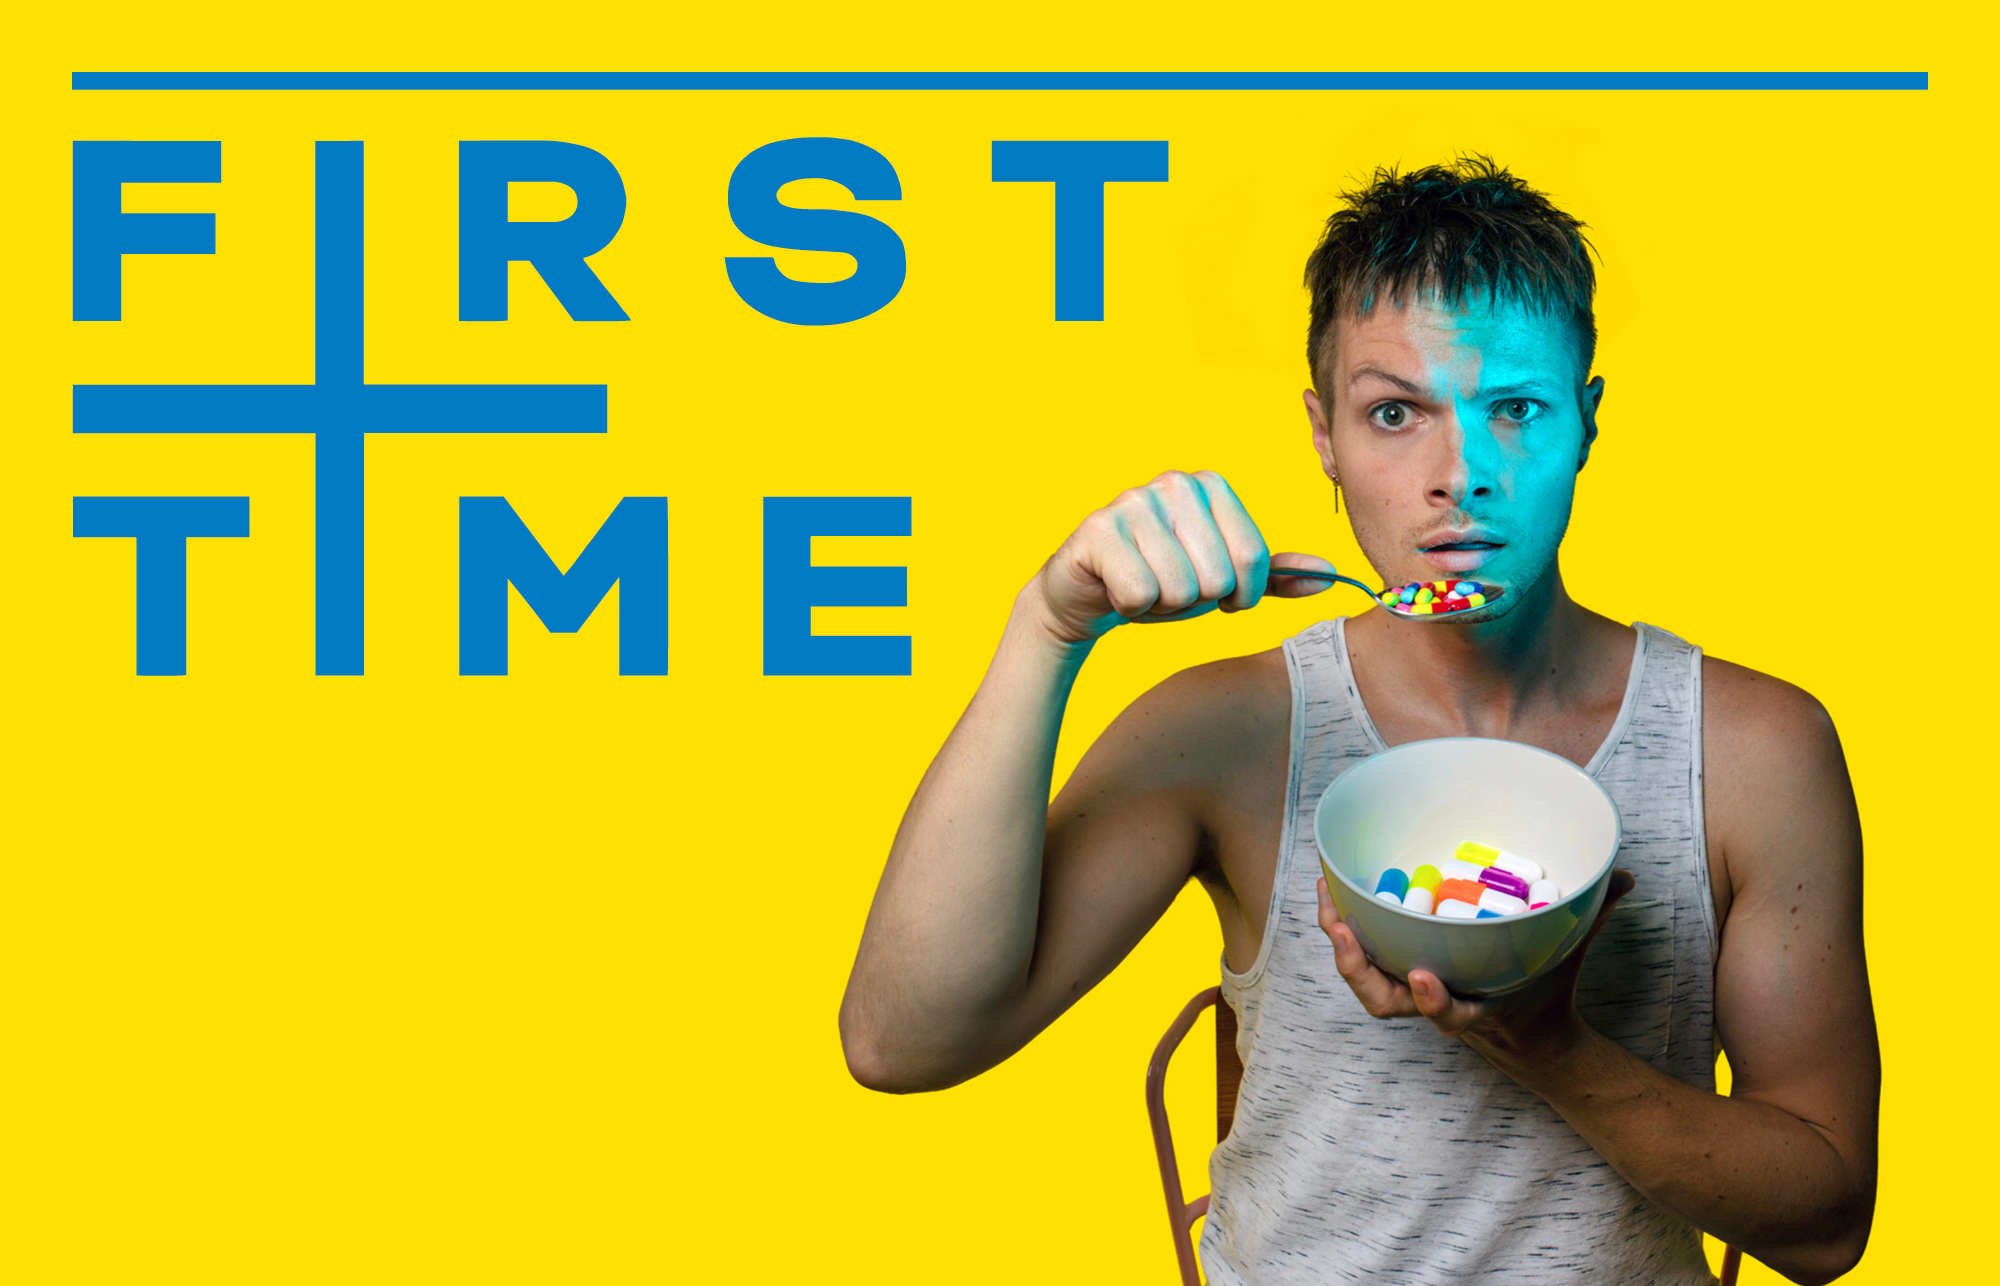 Nathaniel Hall looks into the camera, confused, wearing a white vest. A blue light is cast on his face from the right as he eats a bowl of pills. The background is yellow with blue text that reads FIRST TIME.